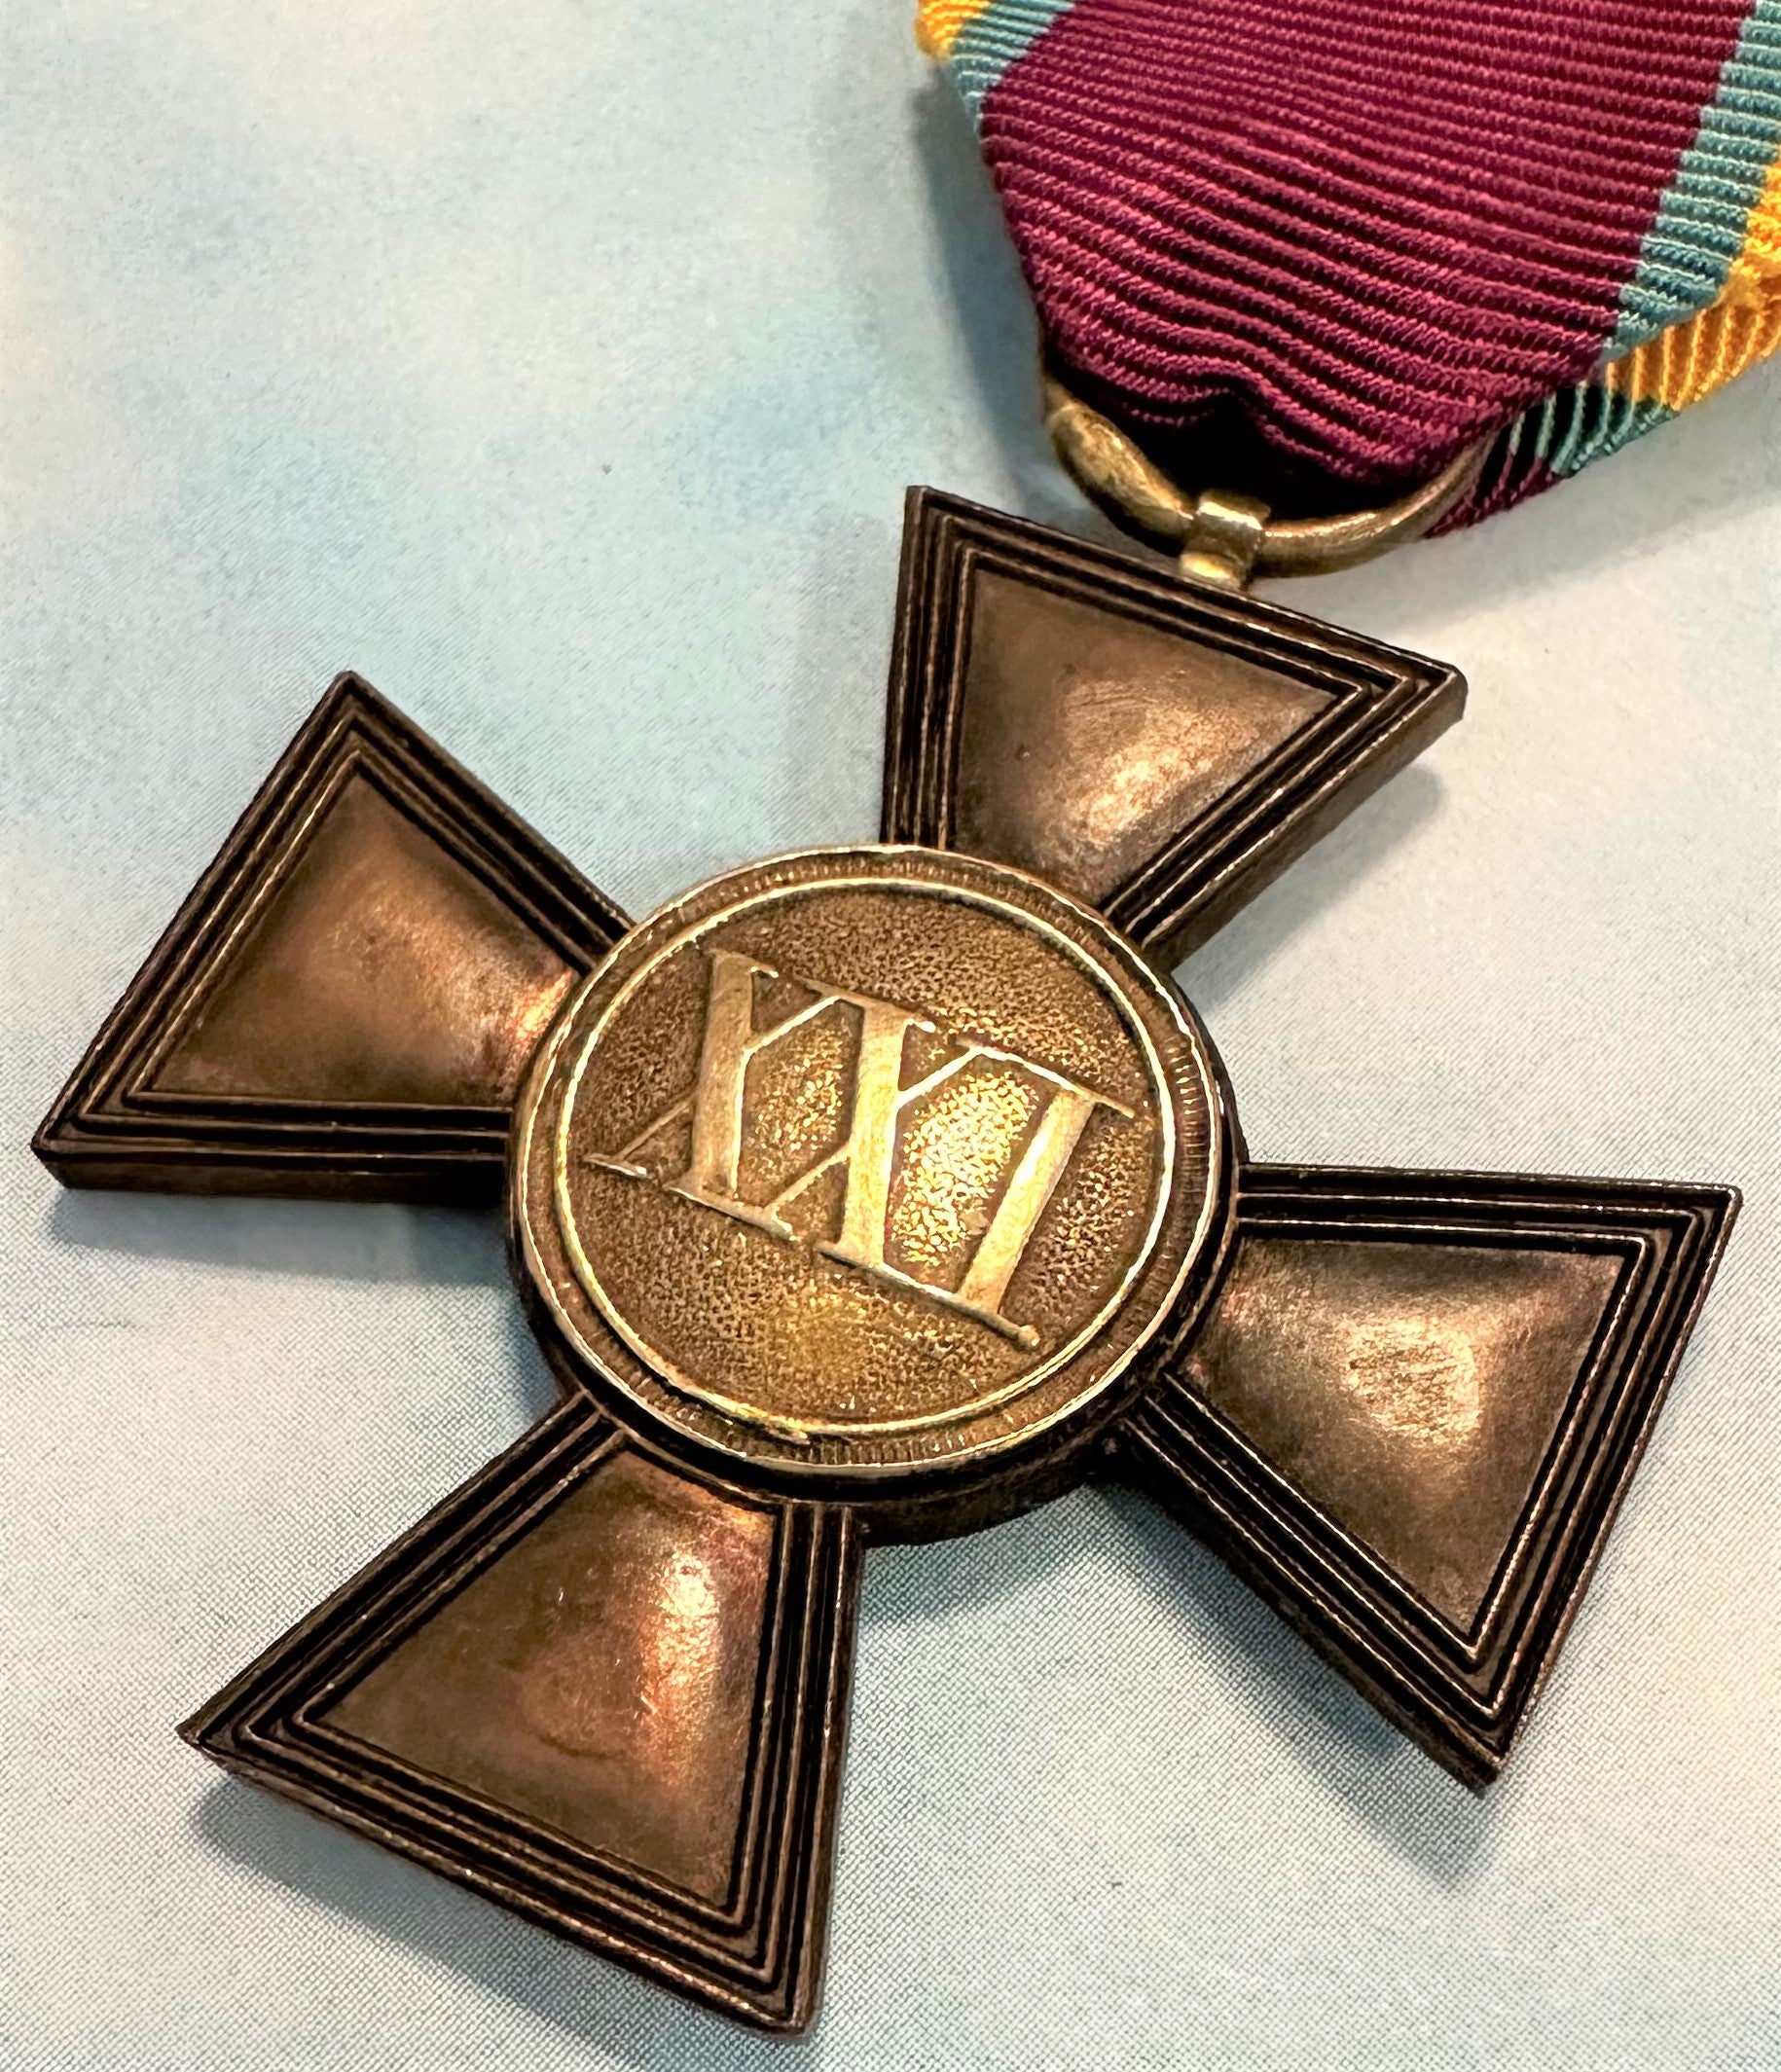 Mecklenburg Schwerin Military Service Cross 1st Class - Commemorating 21 Years of Honor and Dedication - Derrittmeister Militaria Group